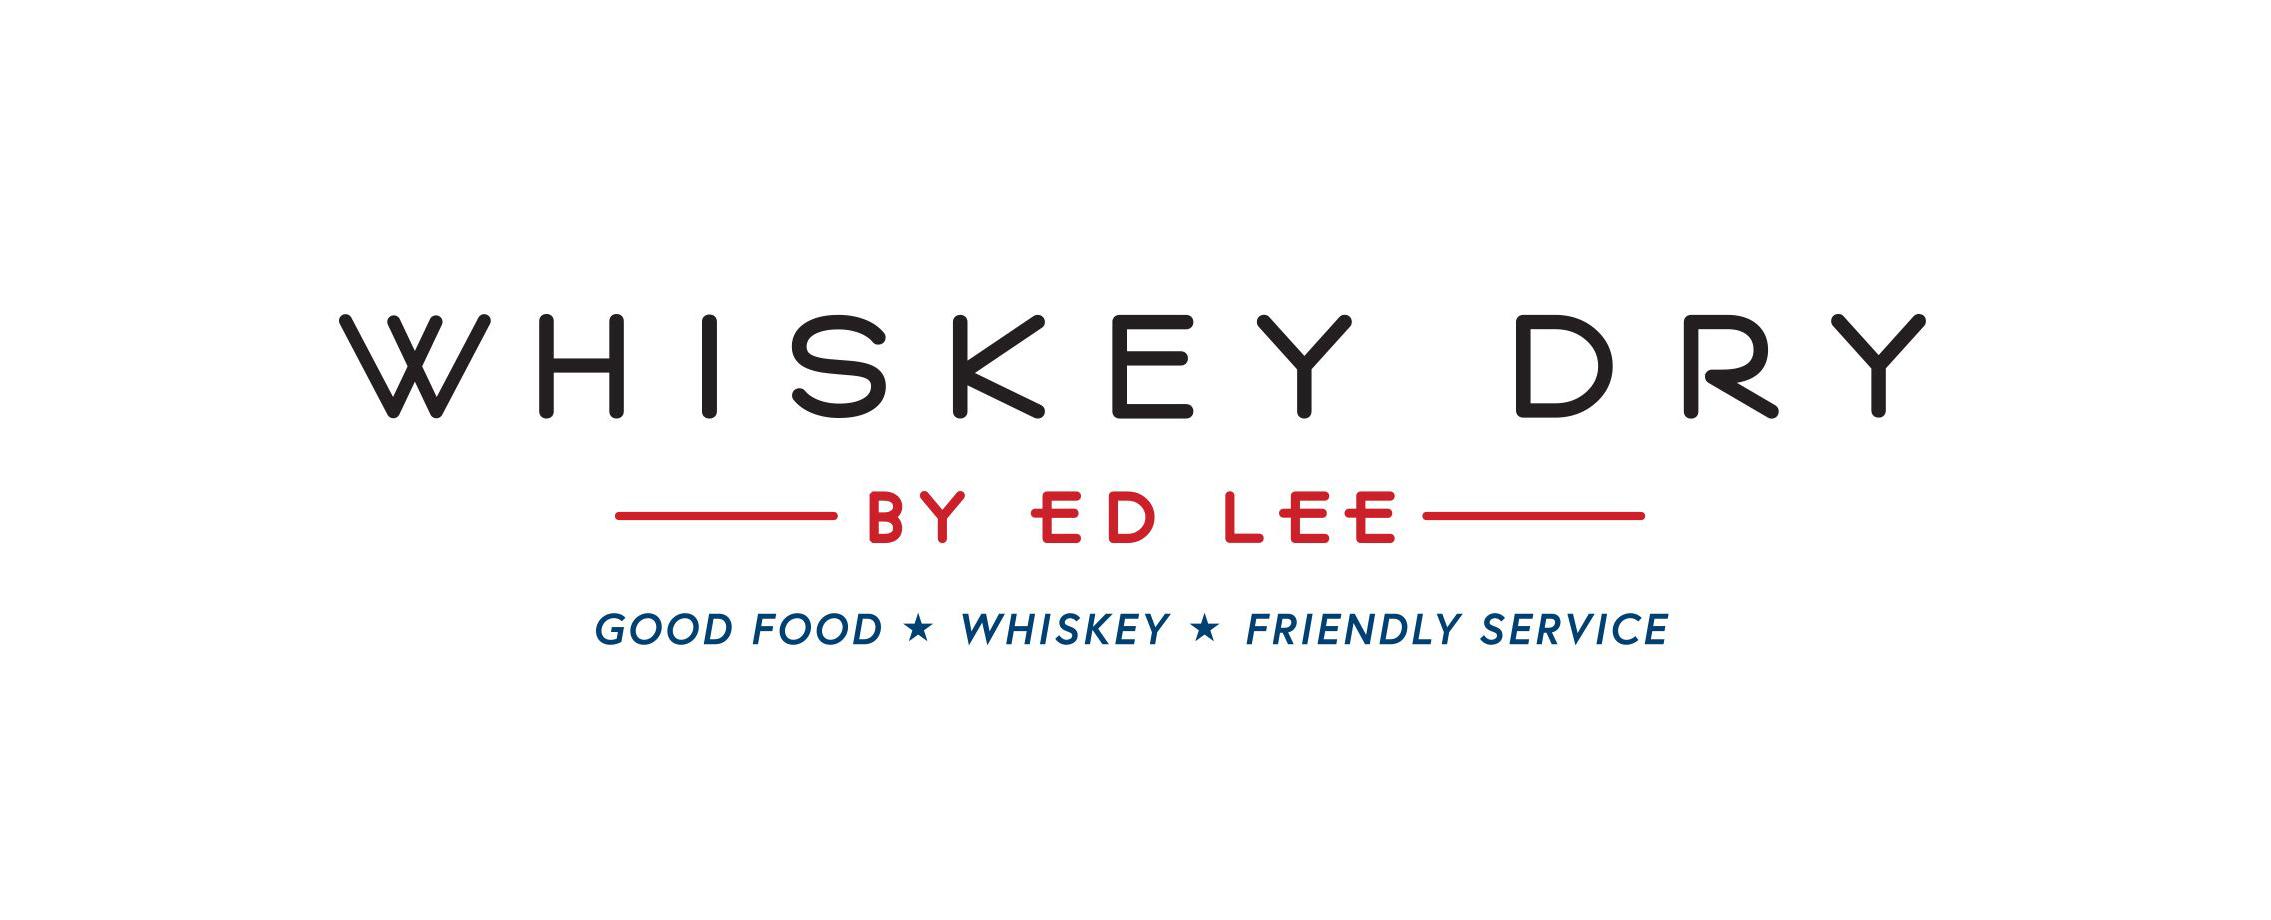 Horizontal Whiskey Dry wordmark. "Whiskey Dry by Ed Lee. Good Foot • Whiskey • Friendly Service"